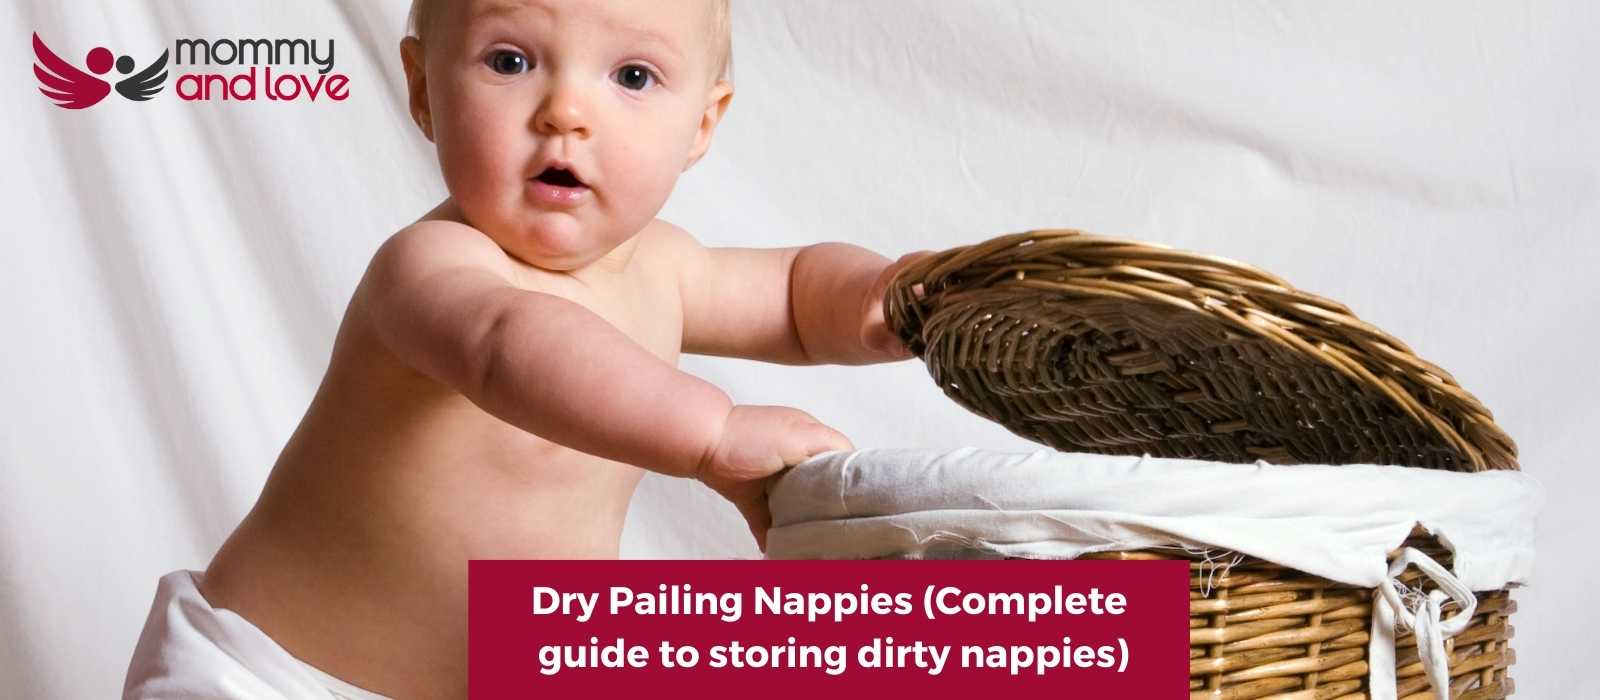 Dry Pailing Nappies (Complete guide to storing dirty nappies)